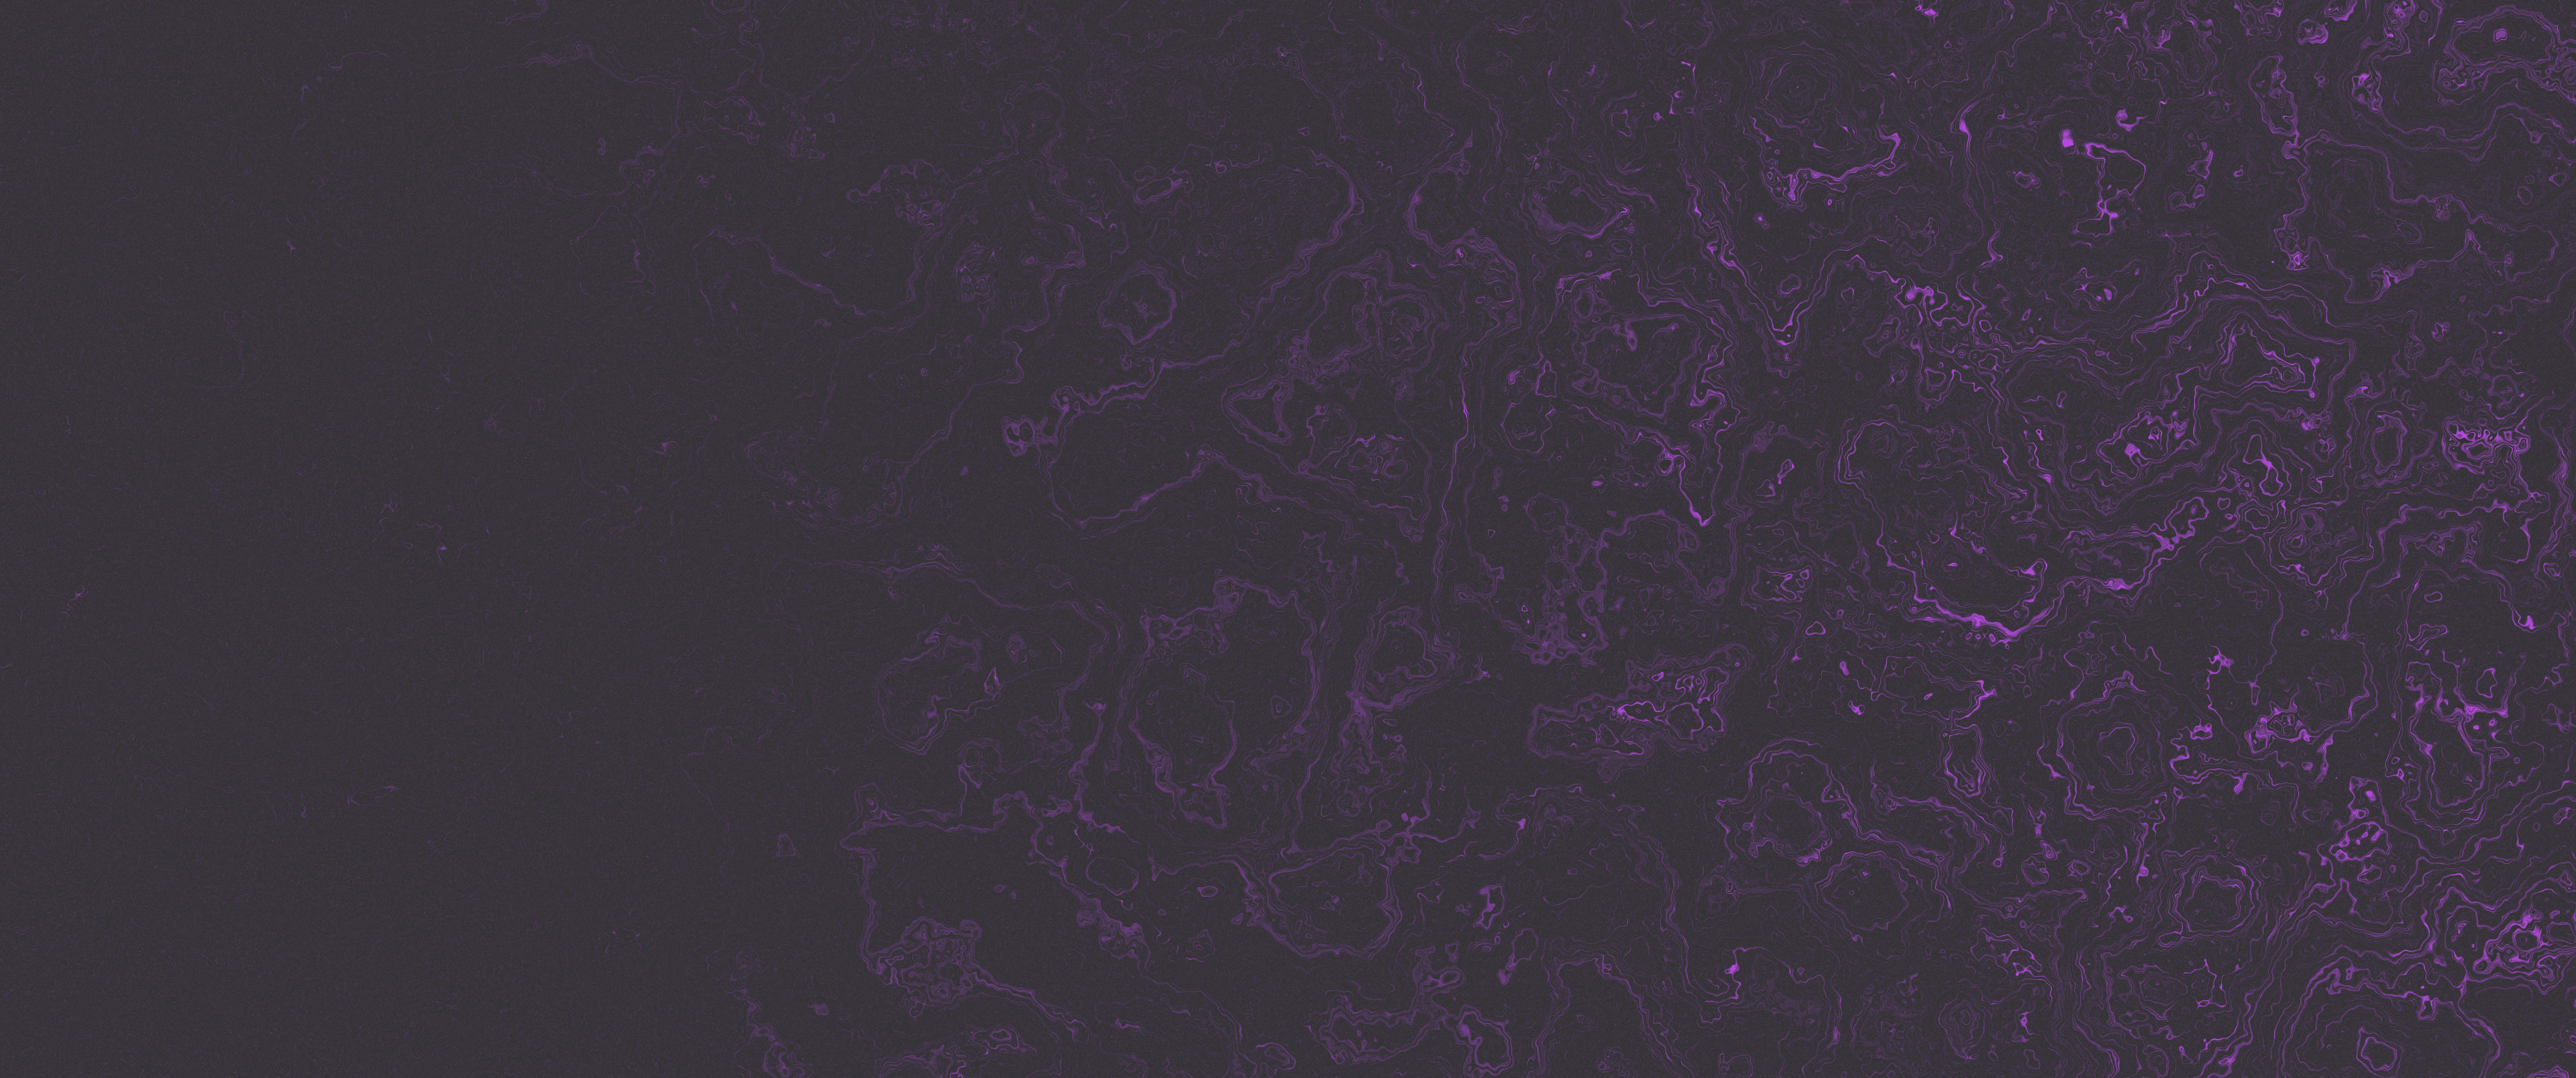 General 3440x1440 purple abstract